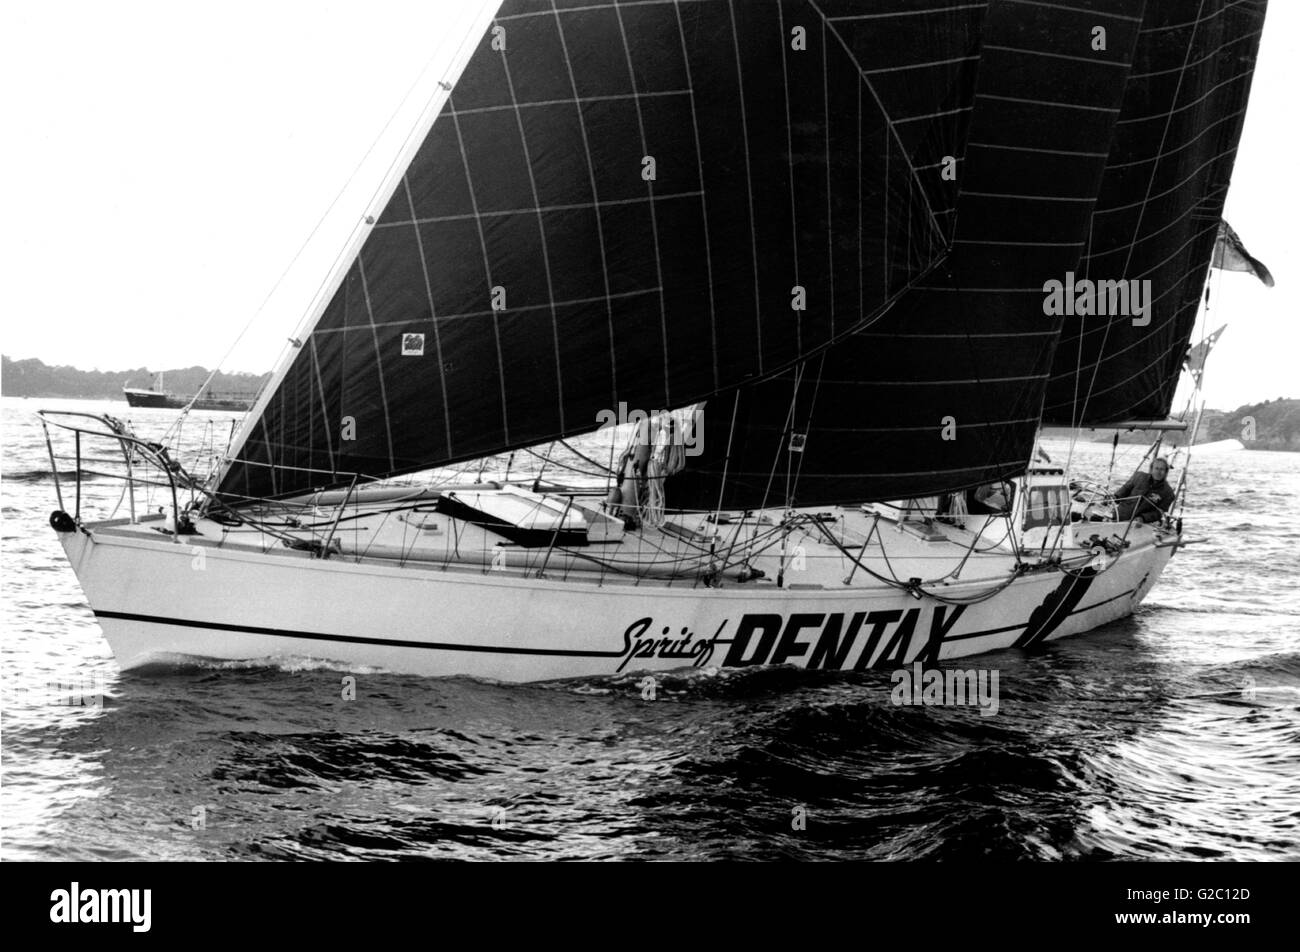 AJAXNETPHOTO. 28TH JUNE, 1981. PLYMOUTH, ENGLAND. - ROUND THE WORLD SINGLE-HANDED RECORD - SPIRIT OF PENTAX SKIPPERD BY PAUL ROGERS SETS OFF ON ATTEMPT TO BREAK SINGLE HANDED WORLD CIRCUMNAVIGATION SAILING RECORD. PHOTO : JONATHAN EASTLAND / AJAX  REF:SPIRIT OF PENTAX 81 Stock Photo